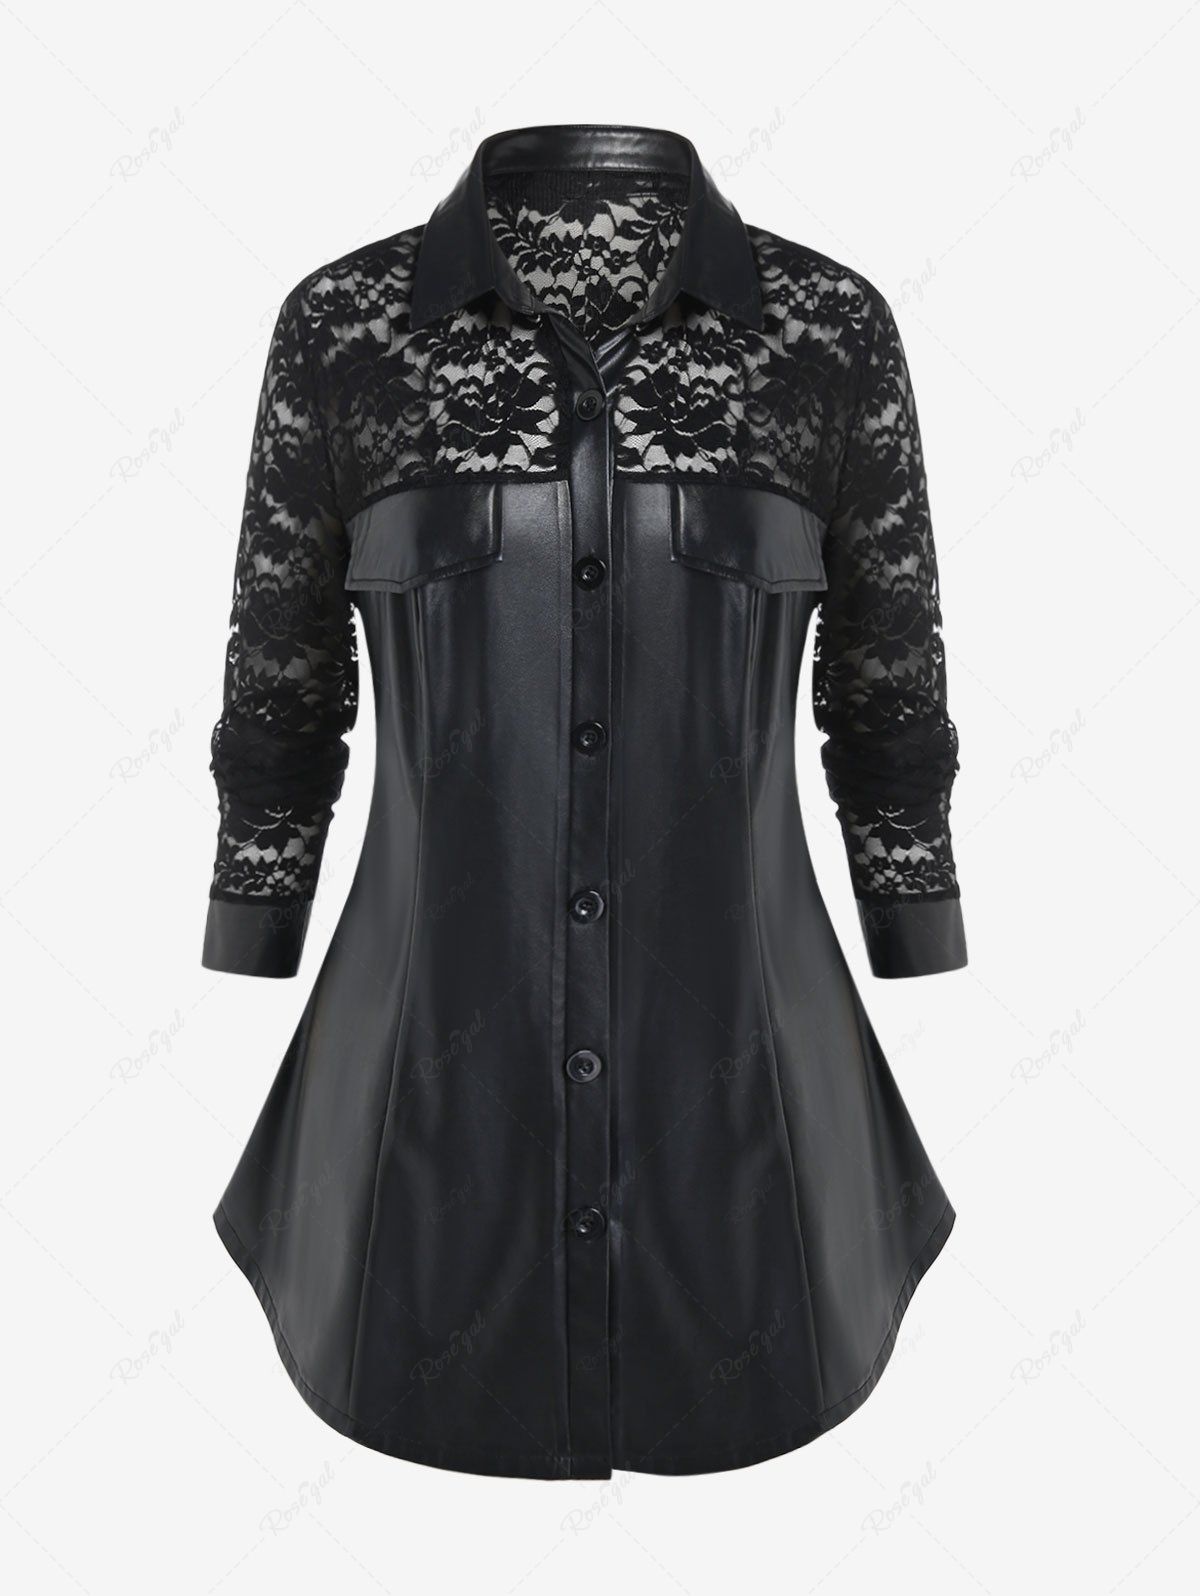 Chic Gothic Long Sleeves Faux Leather Shirt with Lace  